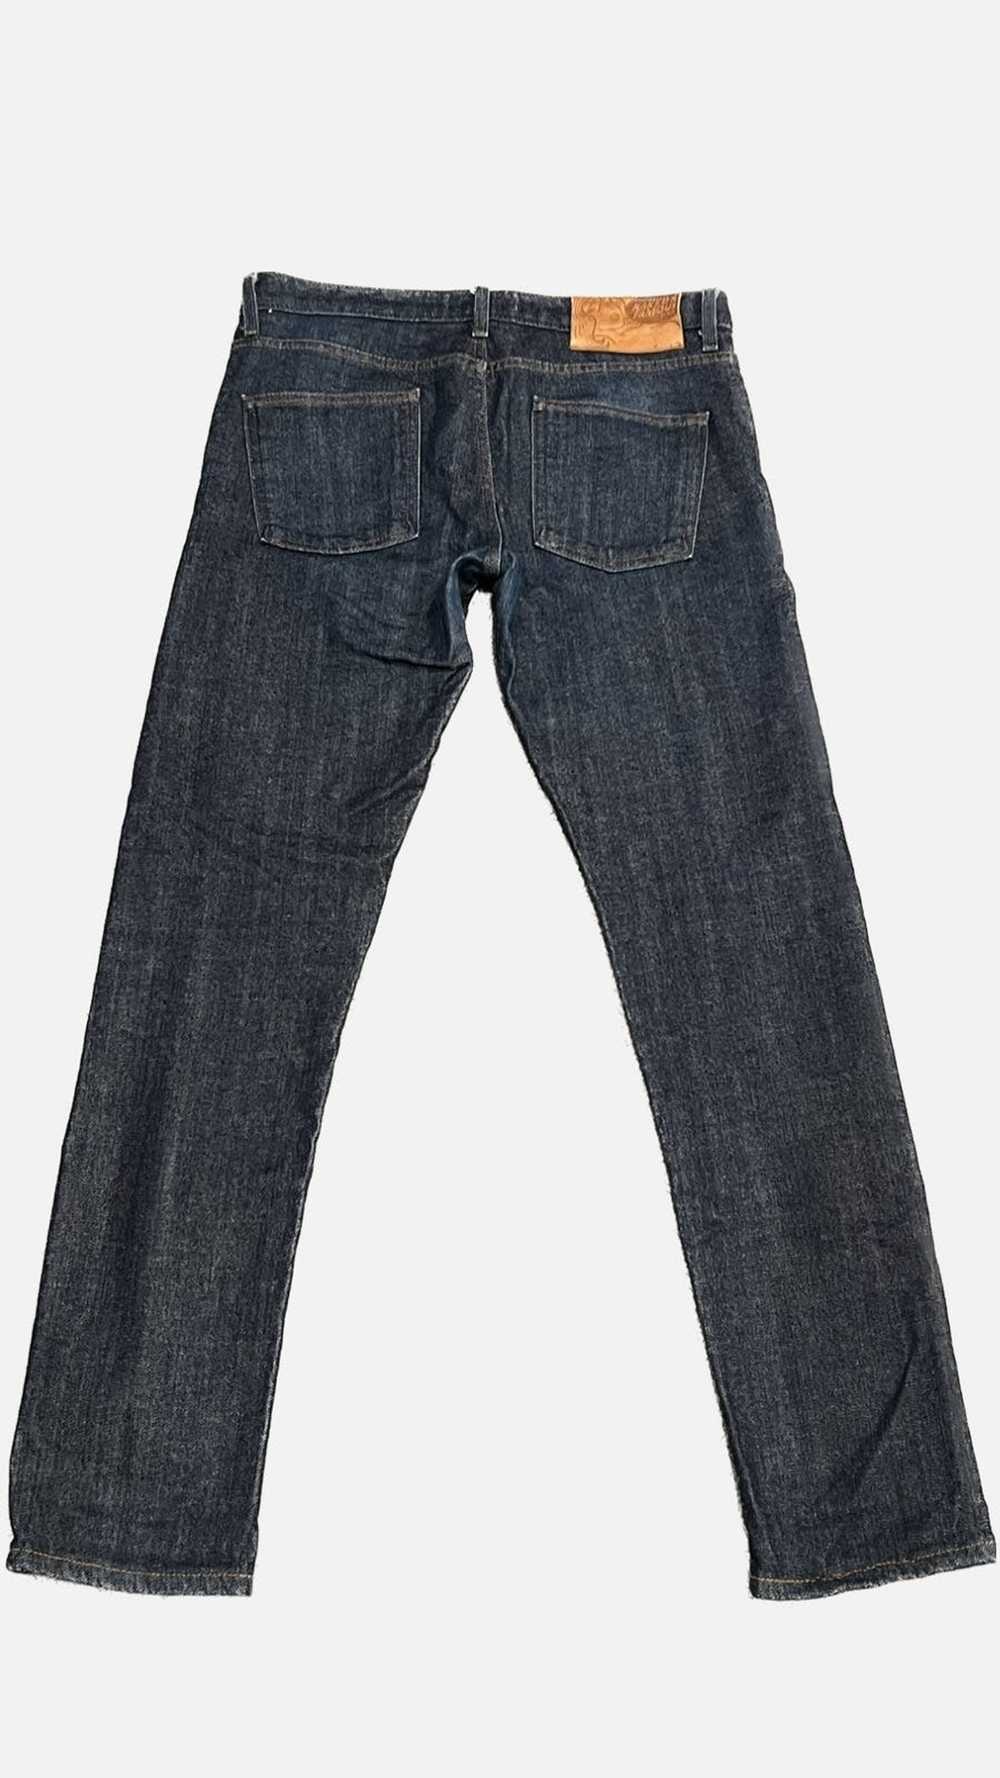 Naked & Famous Stretch Selvedge “Super Skinny Guy” - image 2